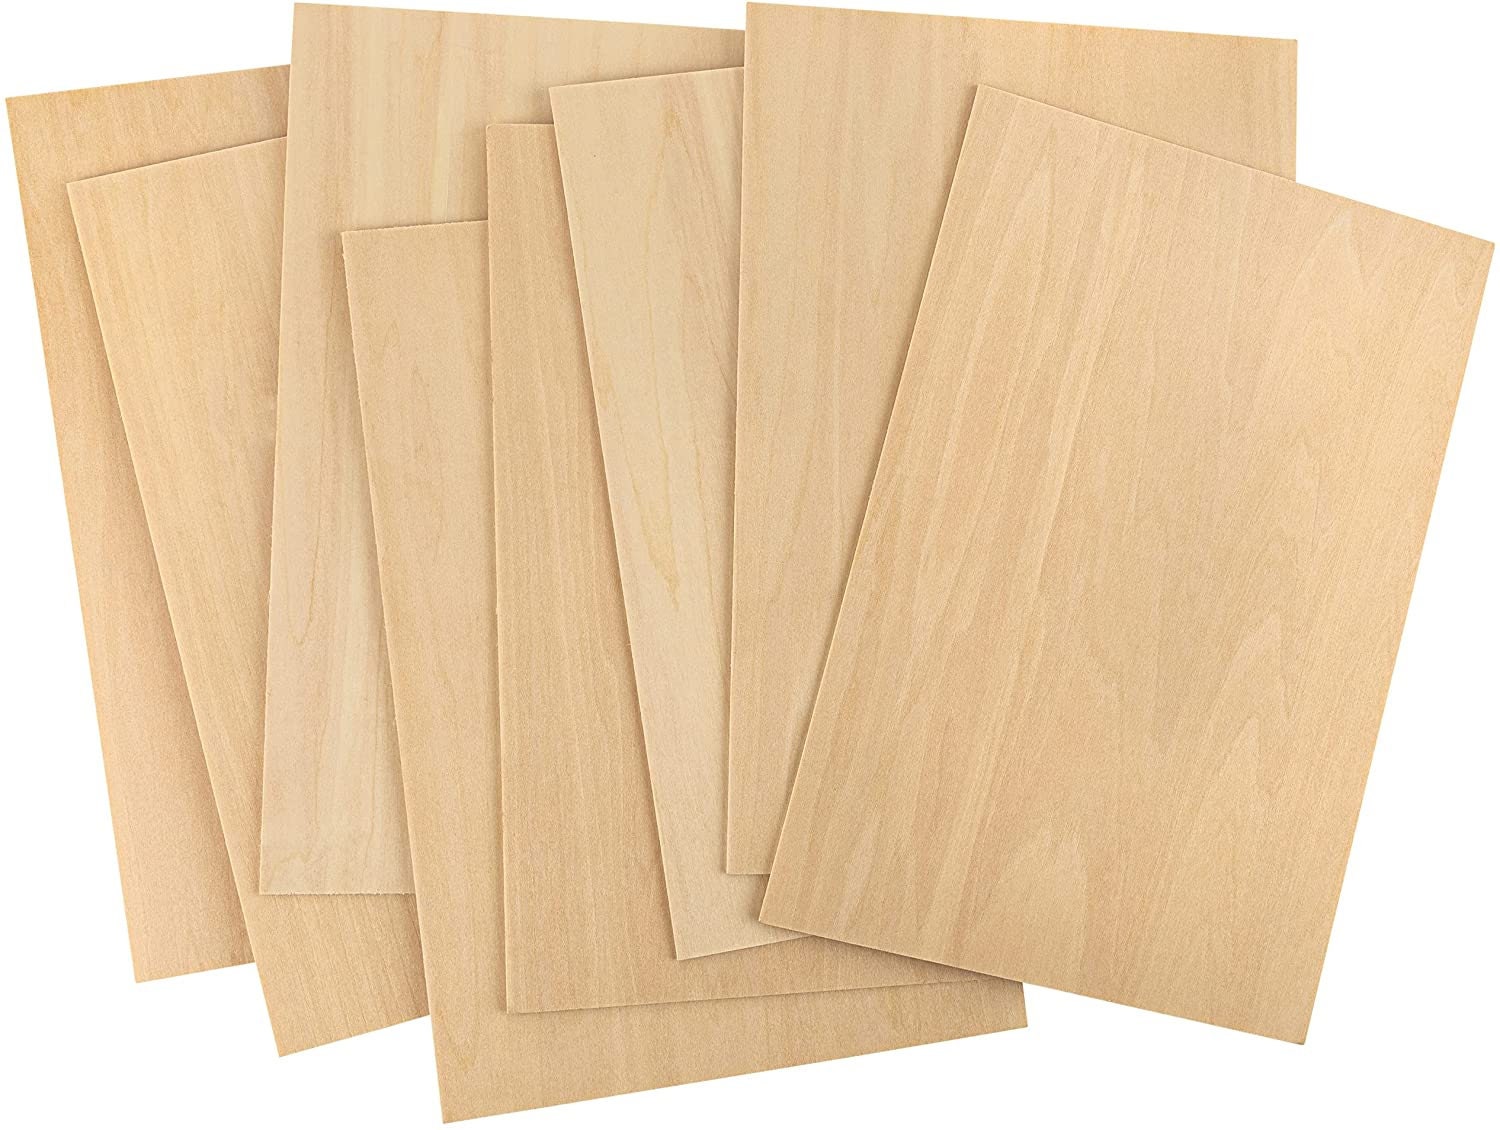  42 Packs Basswood Sheets 1/4 Inch 1/8 Inch 3/16 Inch Plywood  Sheets Thick Wood Sheets 12x12 Inch Unfinished Square Wood Boards For  Crafts Architectural Models DIY Ornaments Drawing Painting Engraving